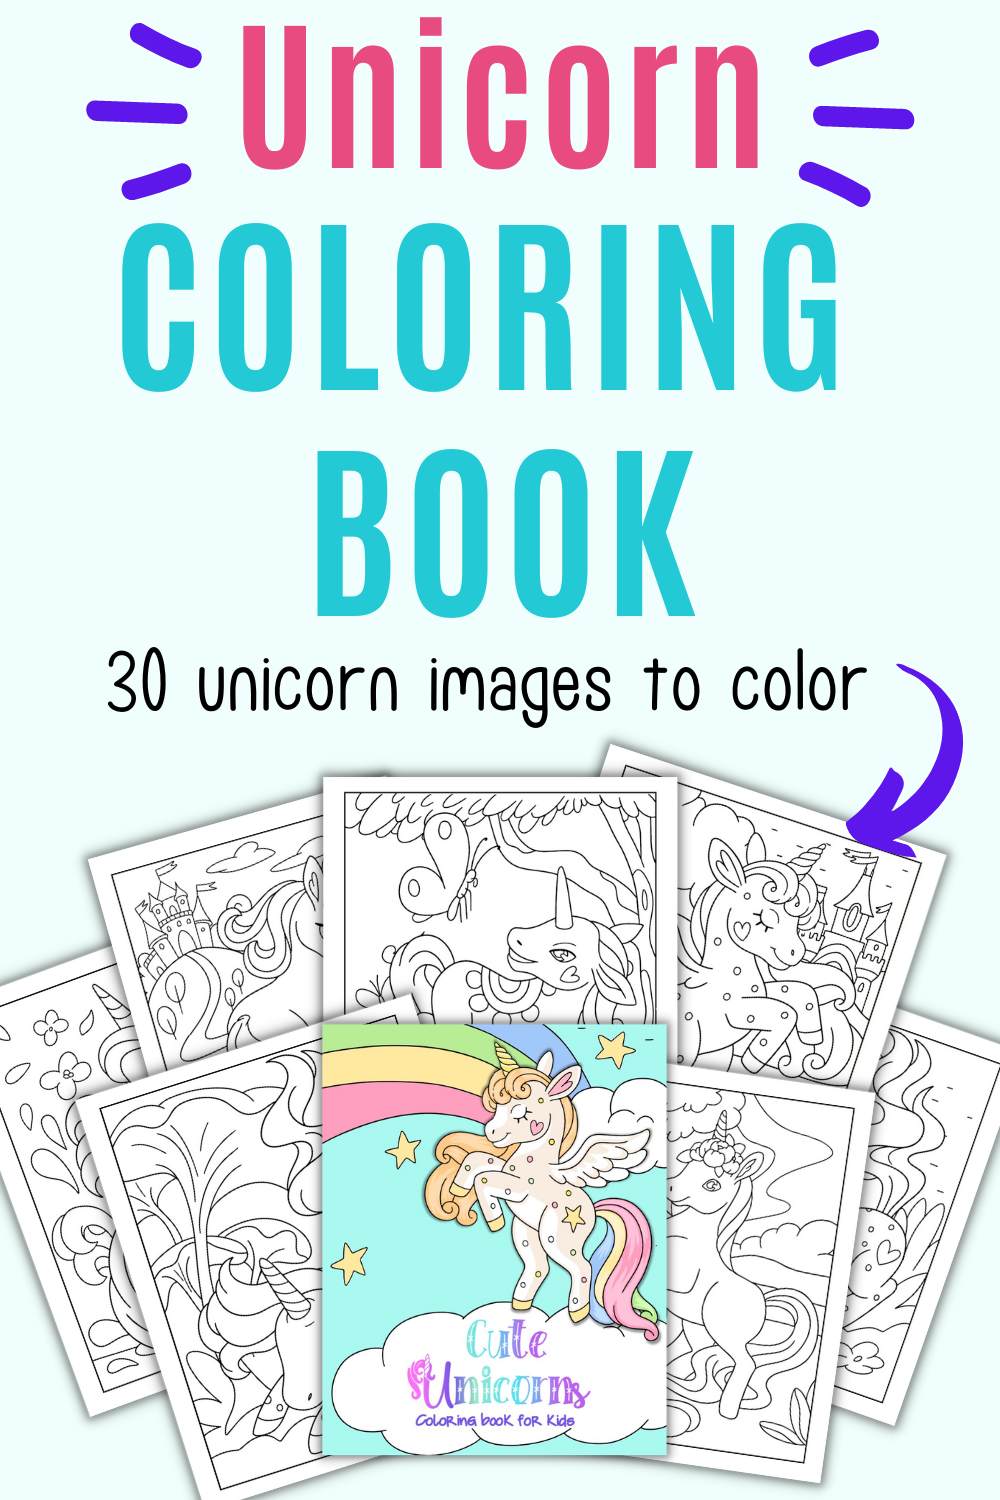 Mockup of a unicorn coloring book with 30 pages to color